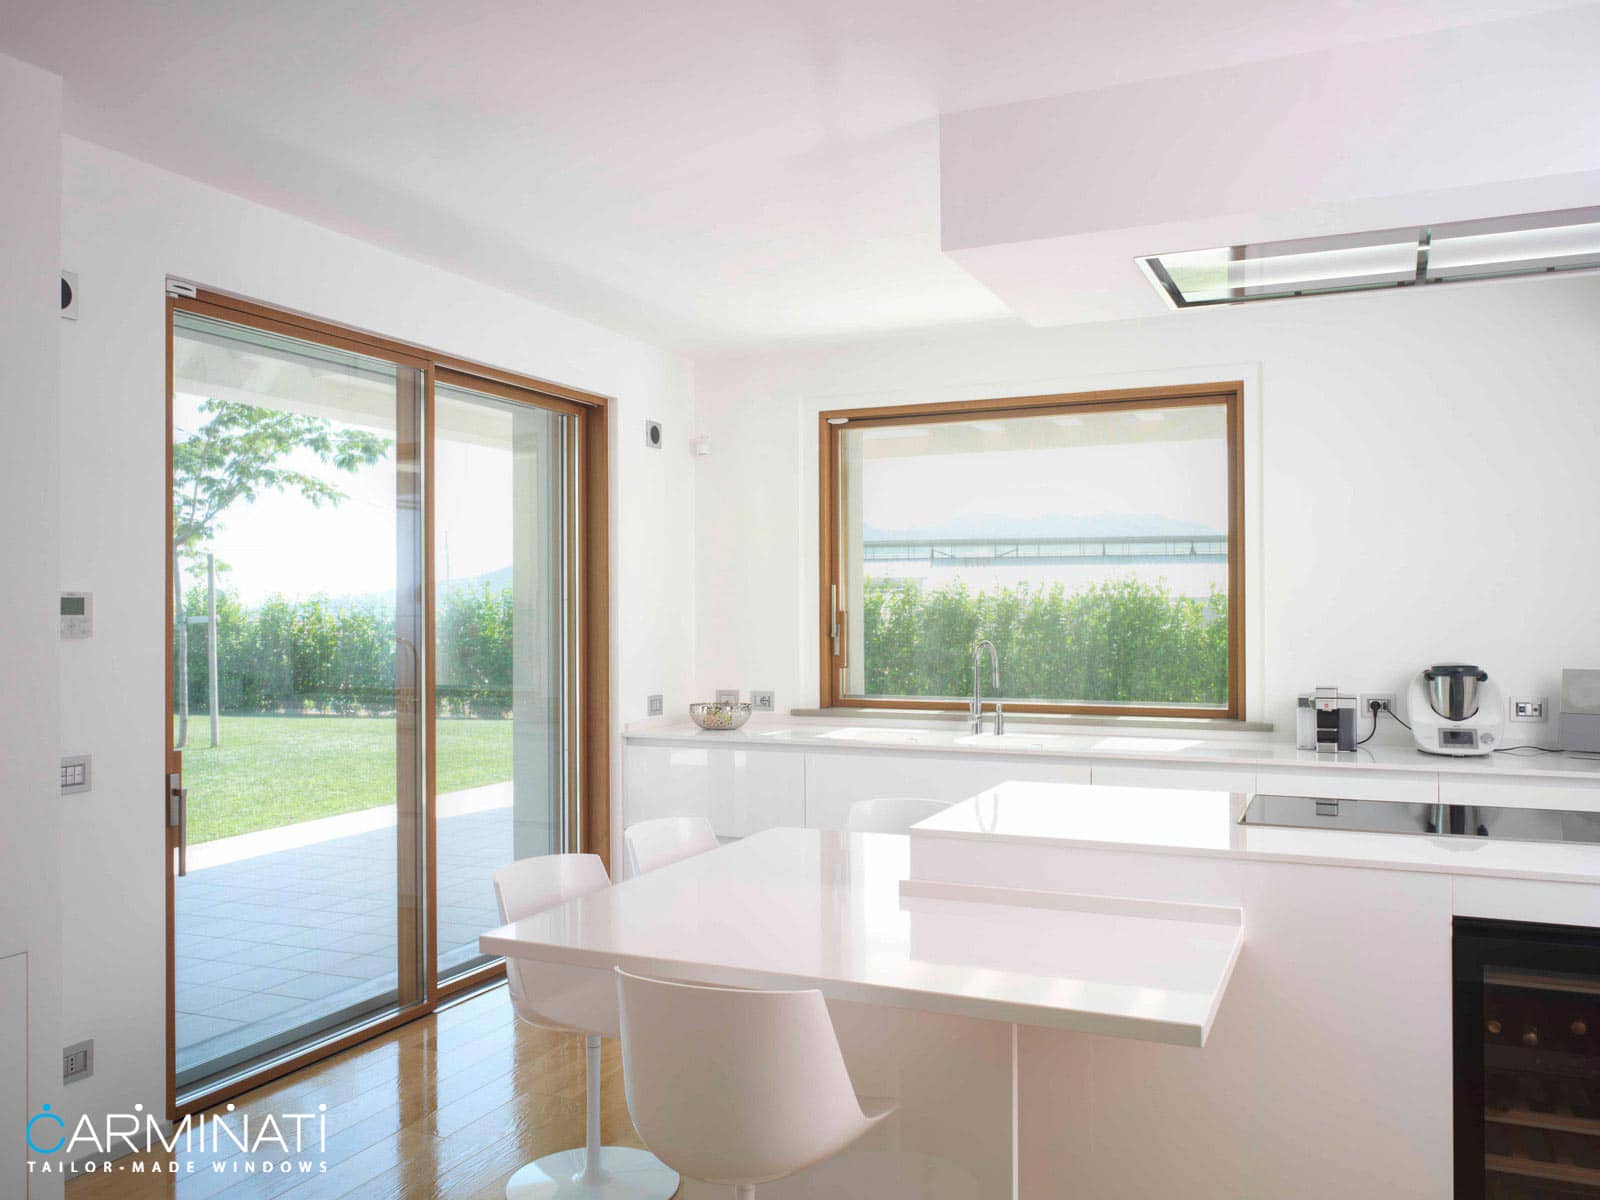 A modern kitchen complete with a minimal frame lift slide door and sliding window by Carminati